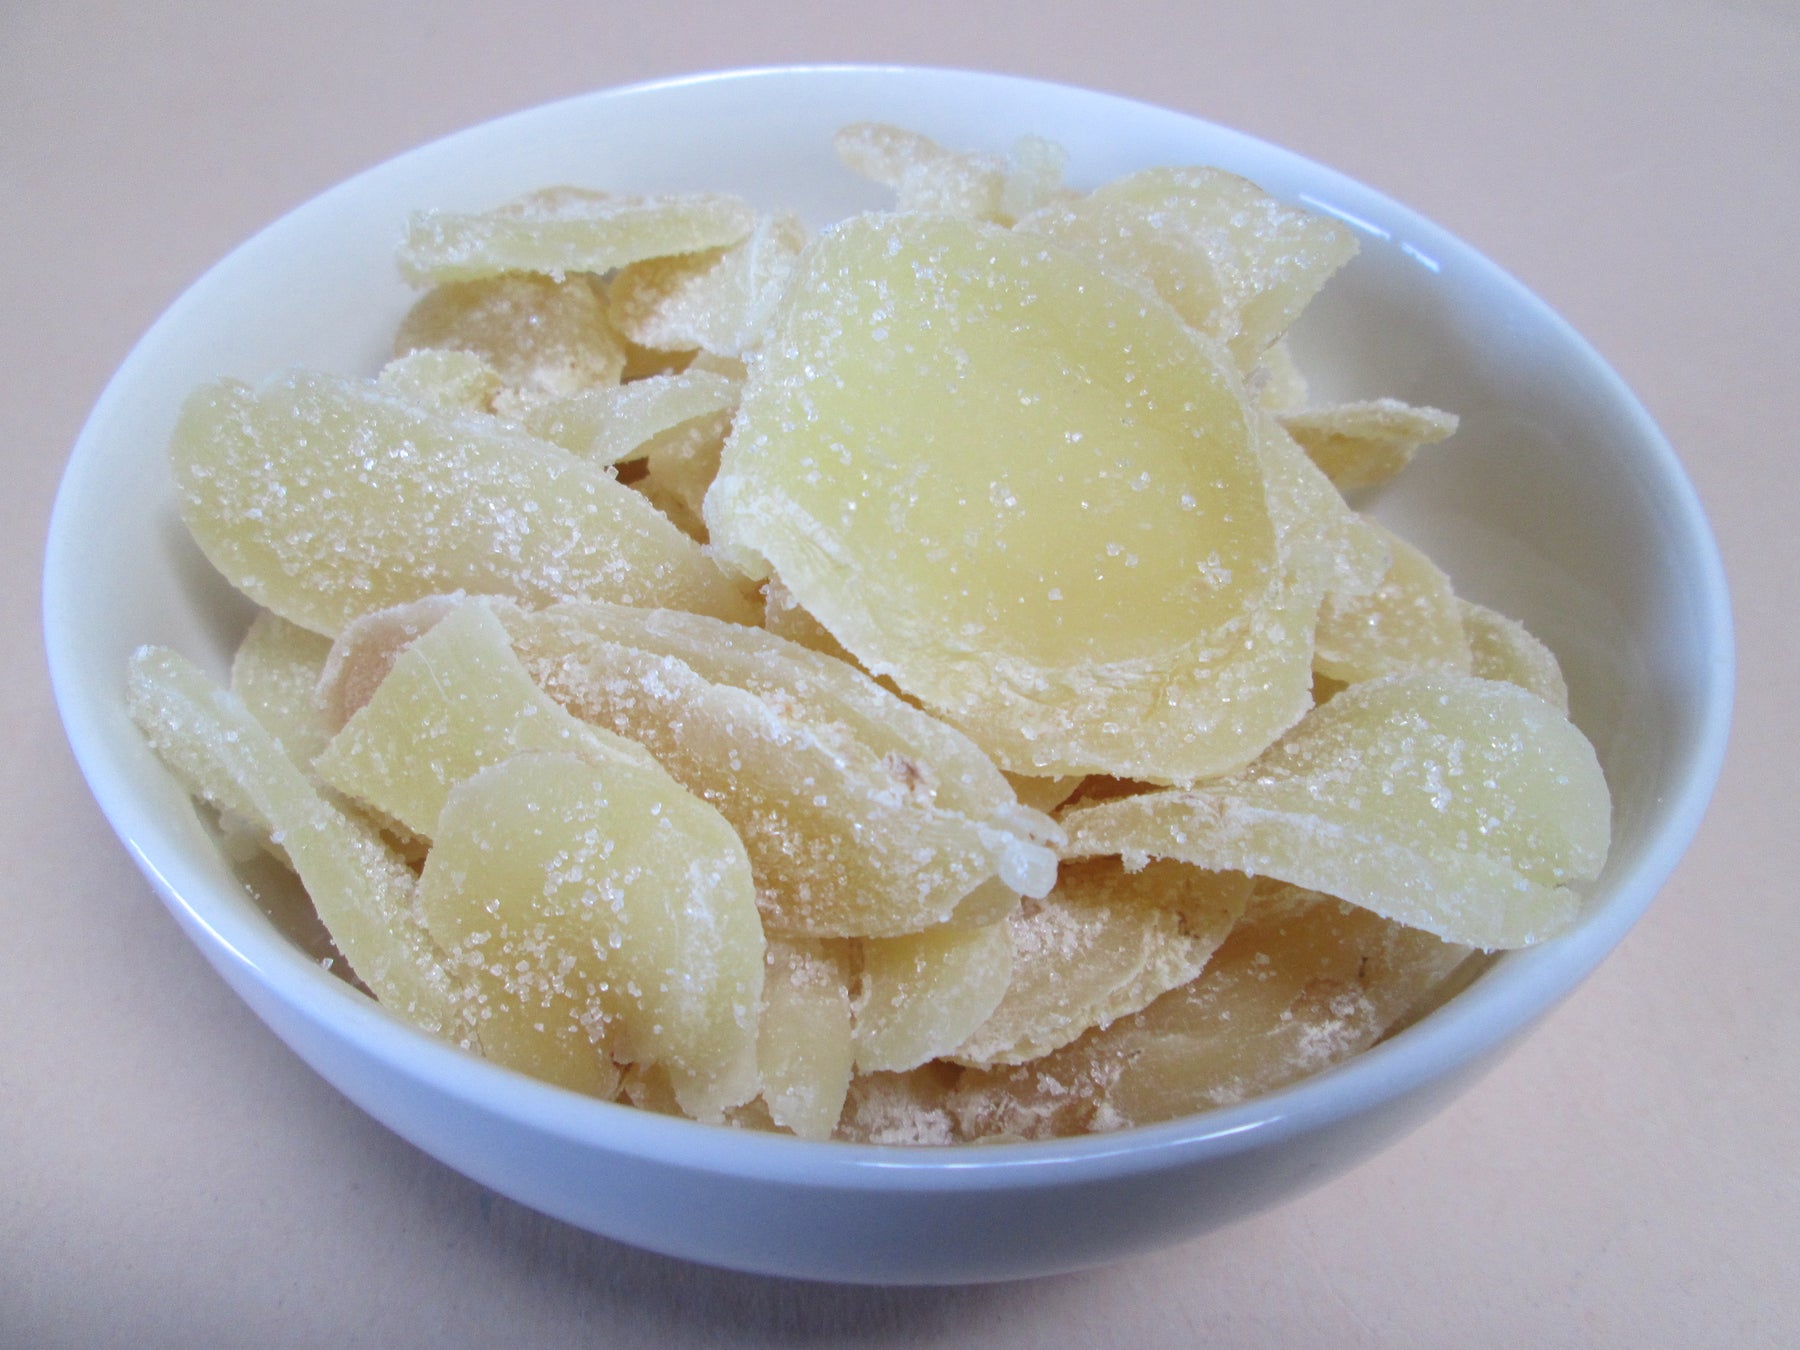 Crystallized Ginger Slices (Candied) 22 lbs / case